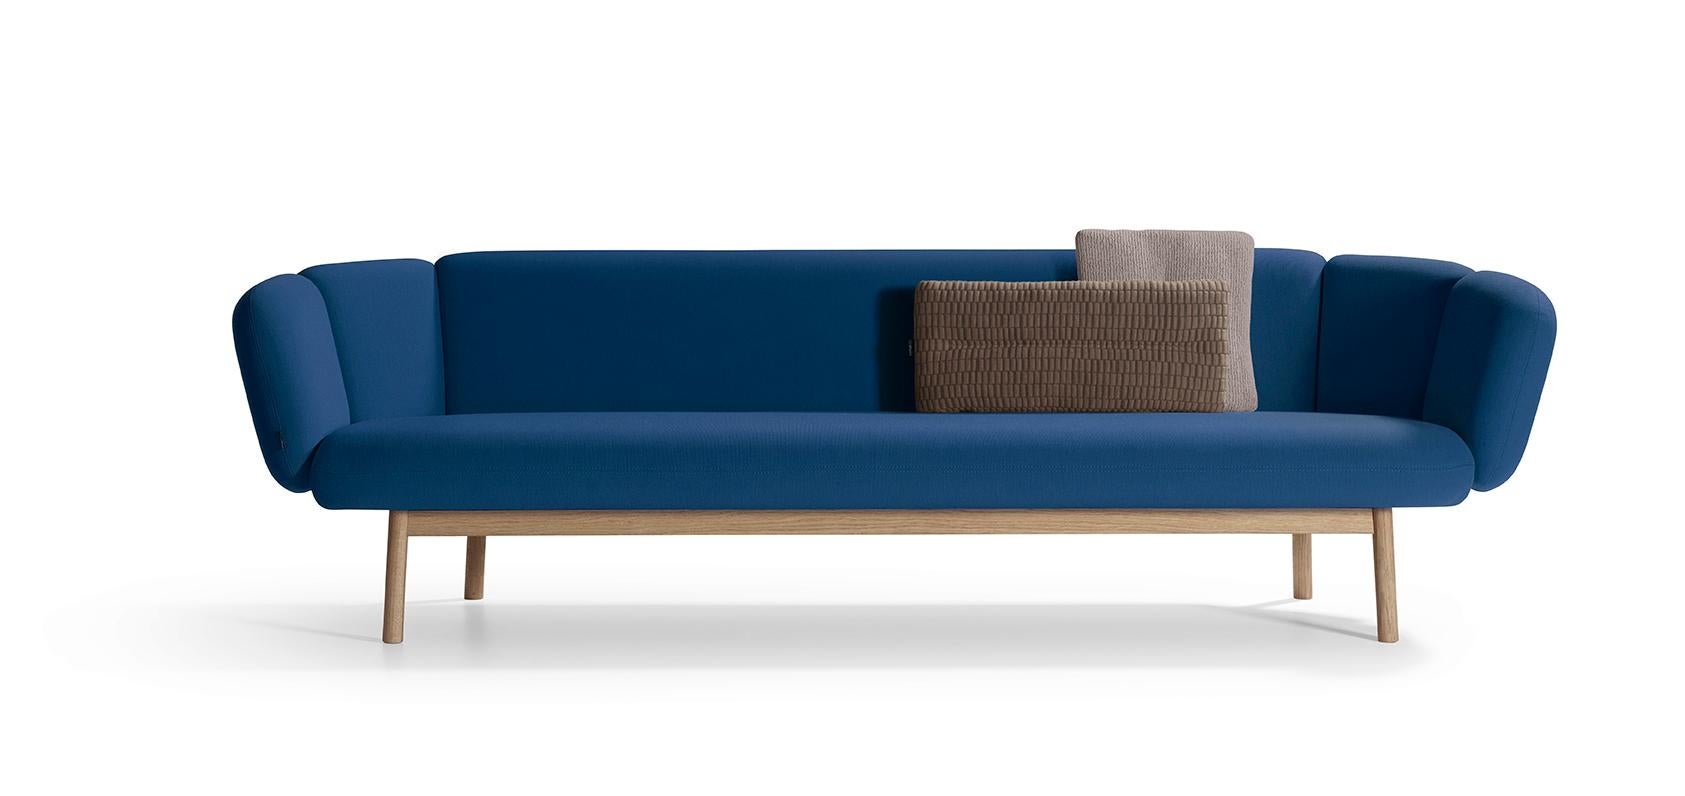 The bras invites you to make yourself comfortable, and embraces you. Reclining and taking it easy, or sitting cosily in a corner, enjoy the relaxation and comfort offered by this beautiful, sleek sofa. One striking feature of the Bras is its unique